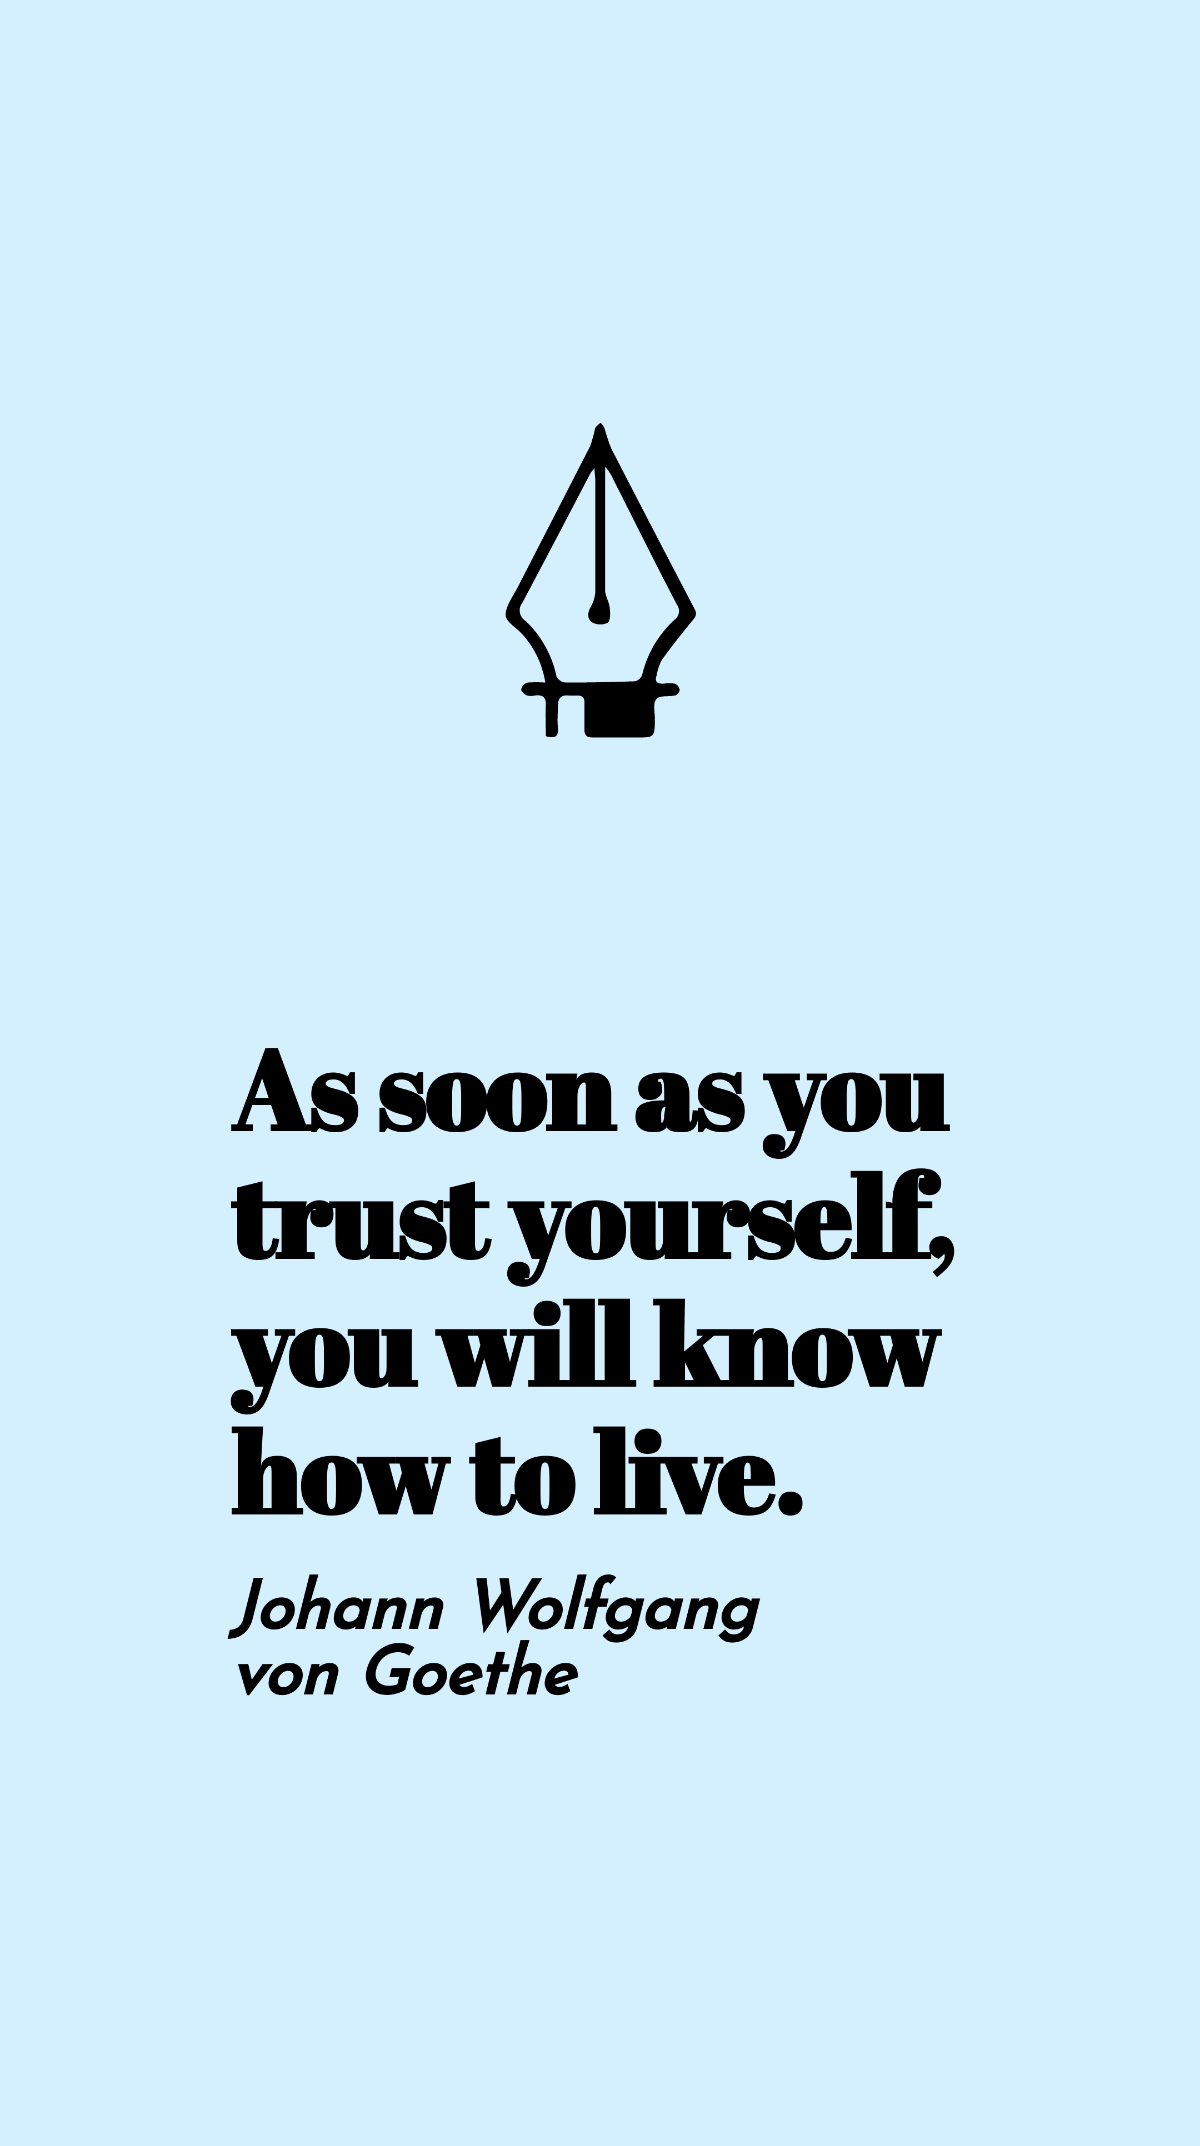 Johann Wolfgang von Goethe - As soon as you trust yourself, you will know how to live.